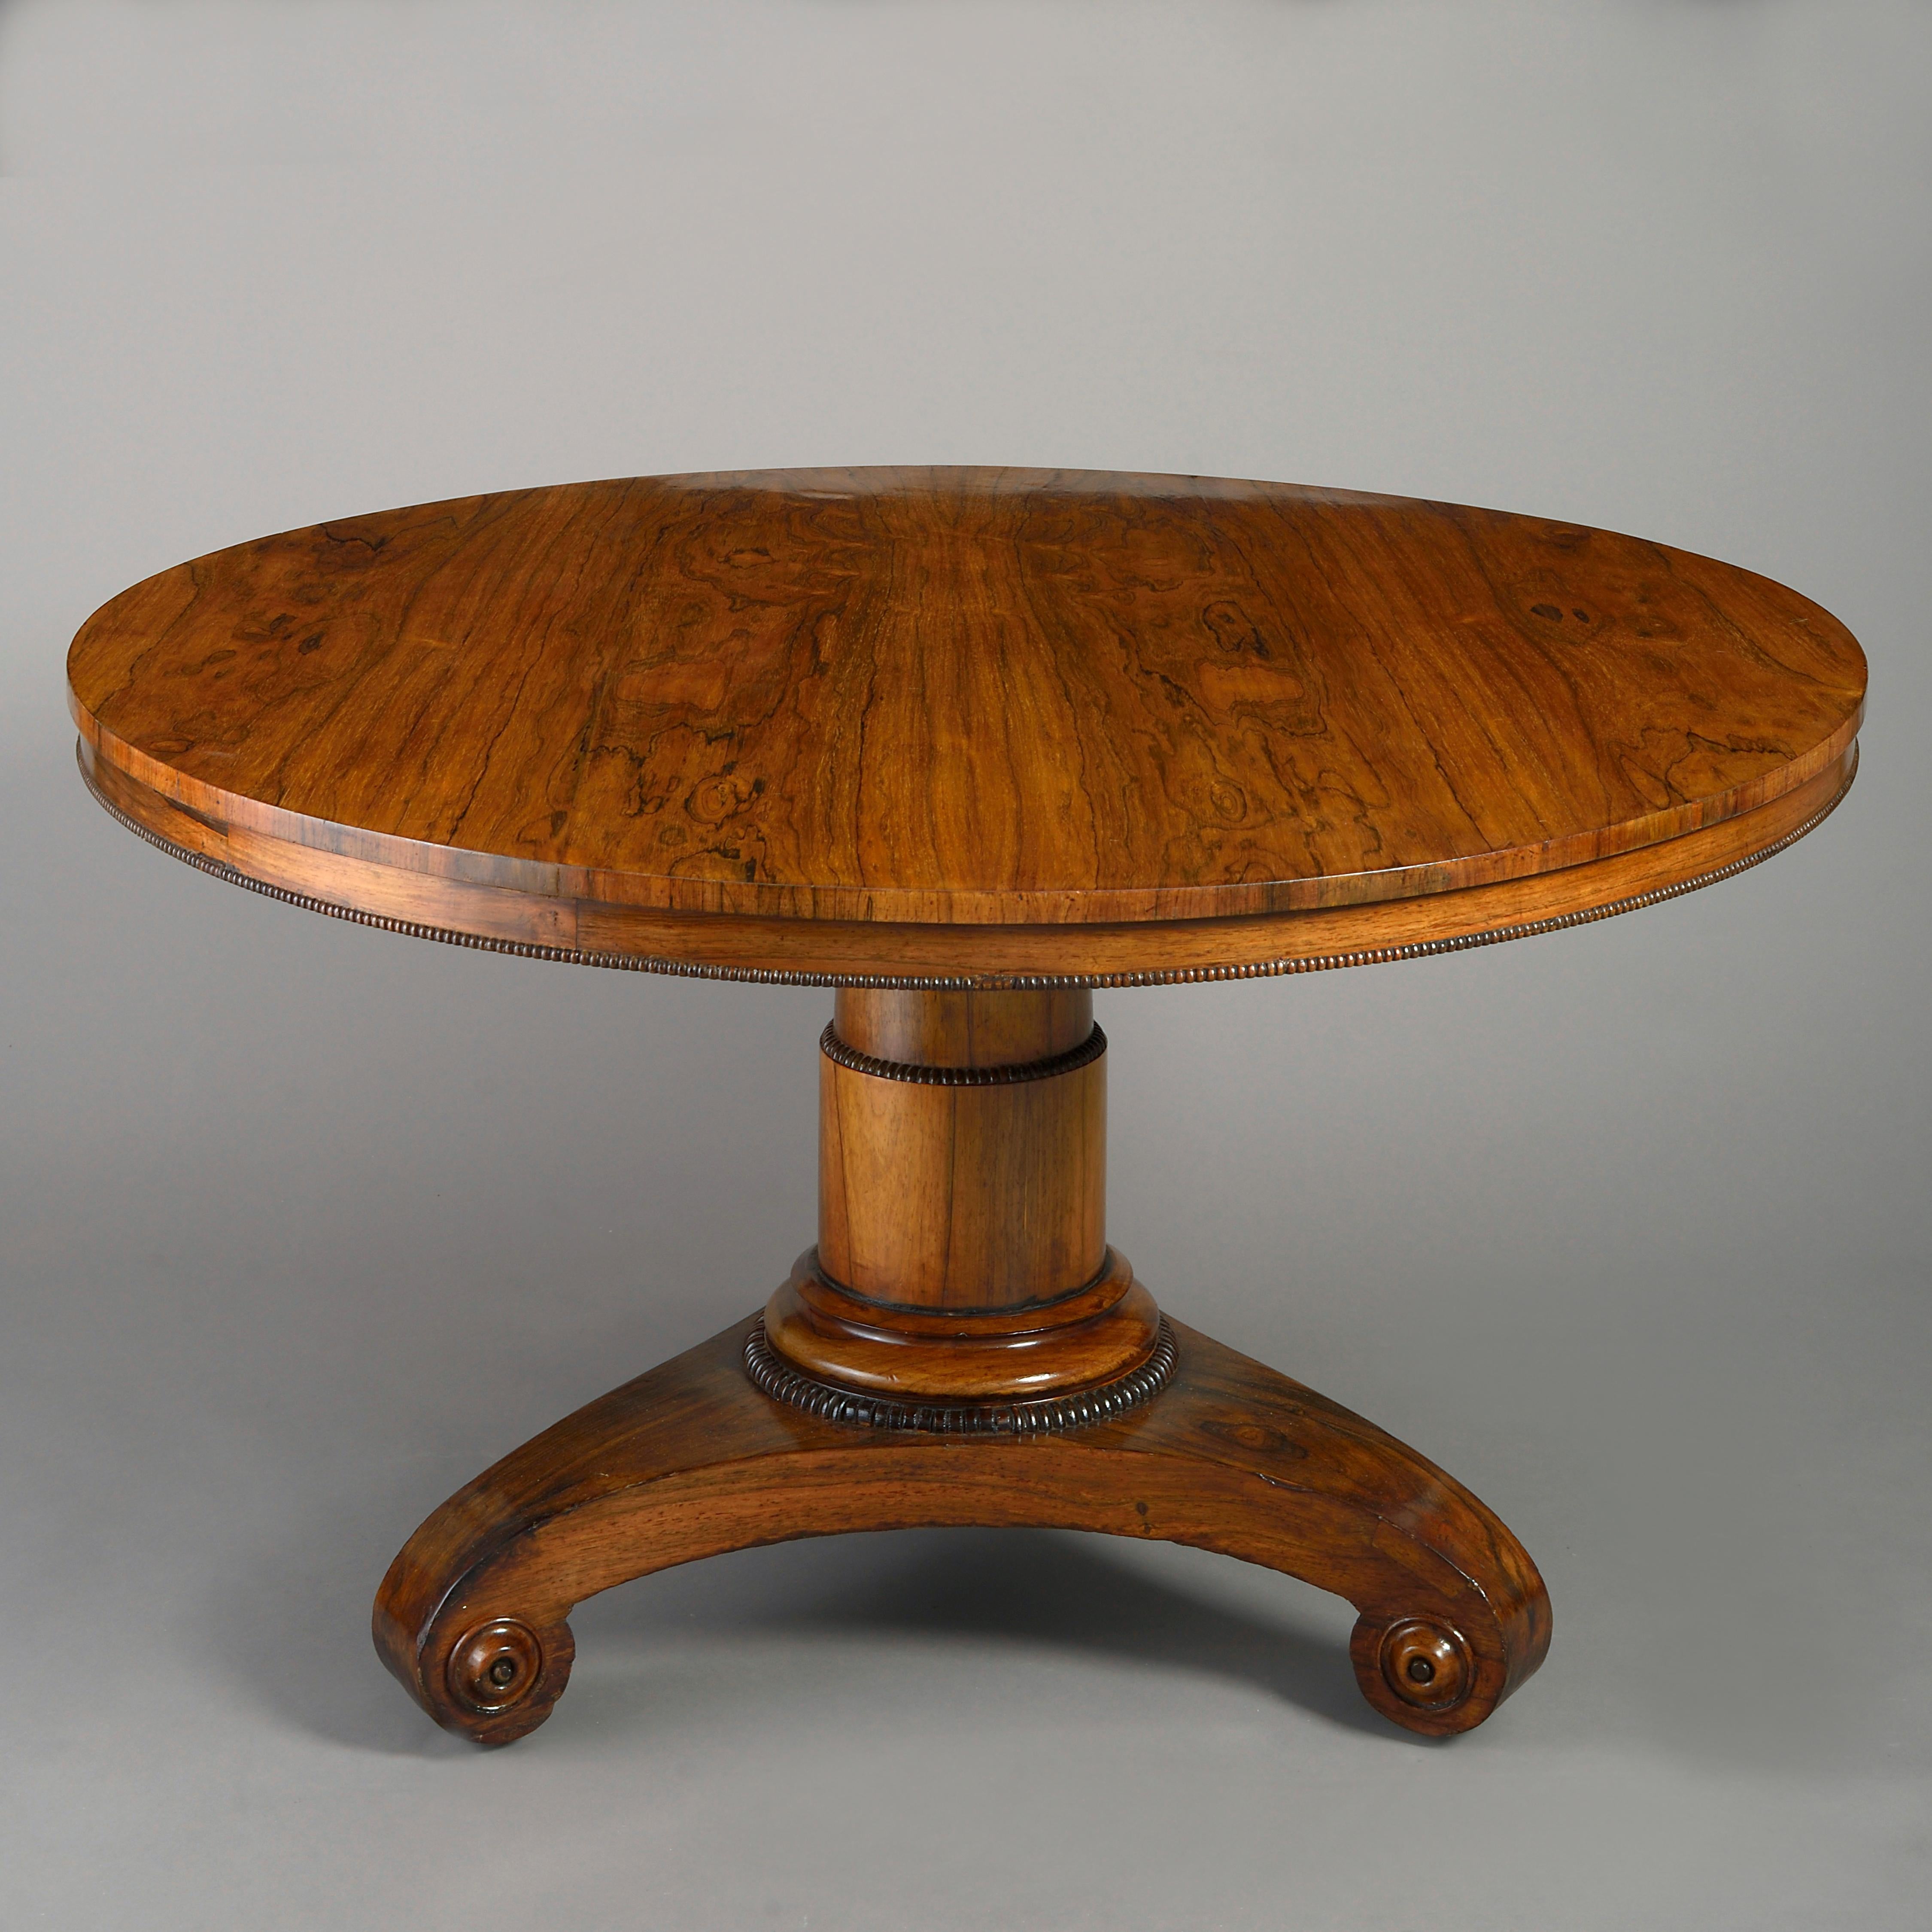 An early 19th century Regency Period rosewood centre table or breakfast table, the finely figured circular walnut veneered top with beaded apron, set upon a gun barrel stem and raised on a shaped concave triform base with roundels and the original